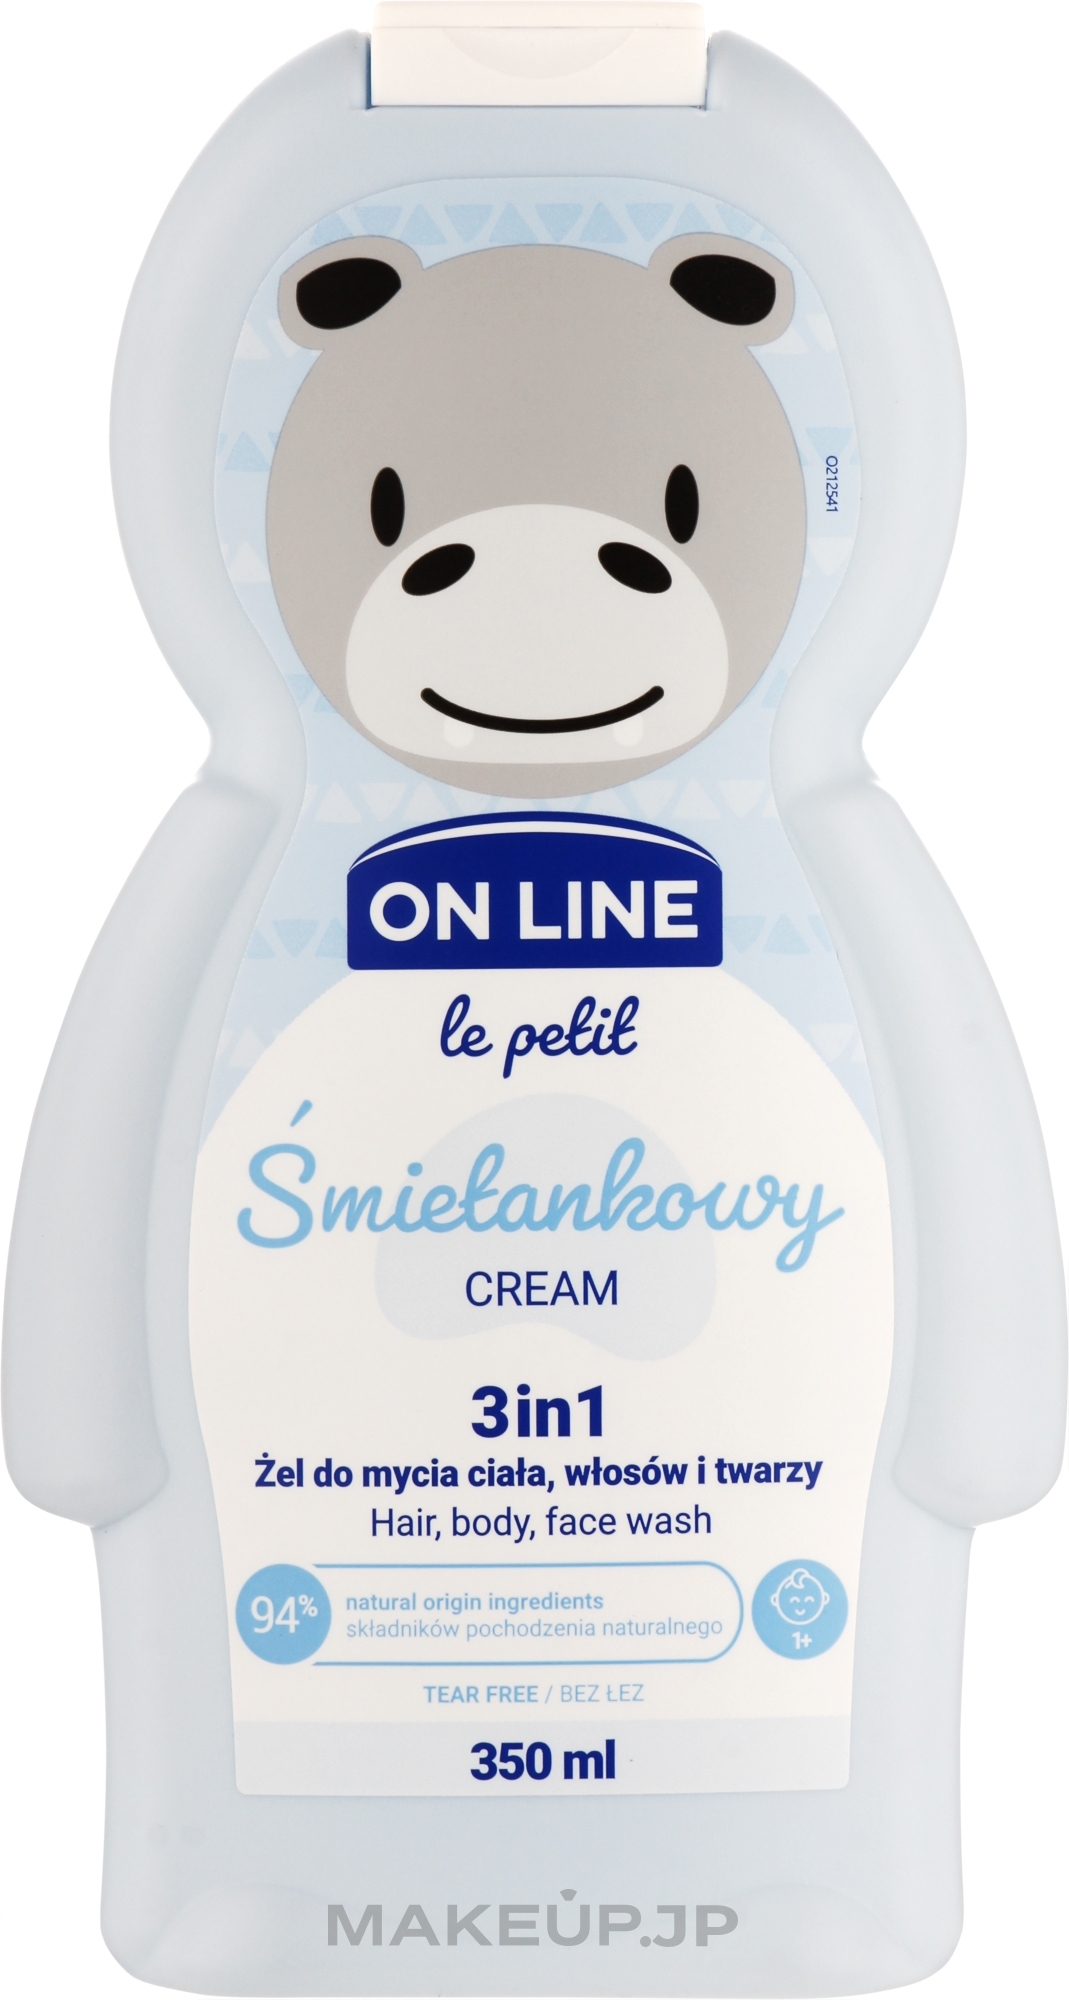 Body and Hair Cleanser 'Cream' - On Line Le Petit Cream 3 In 1 Hair Body Face Wash — photo 350 ml